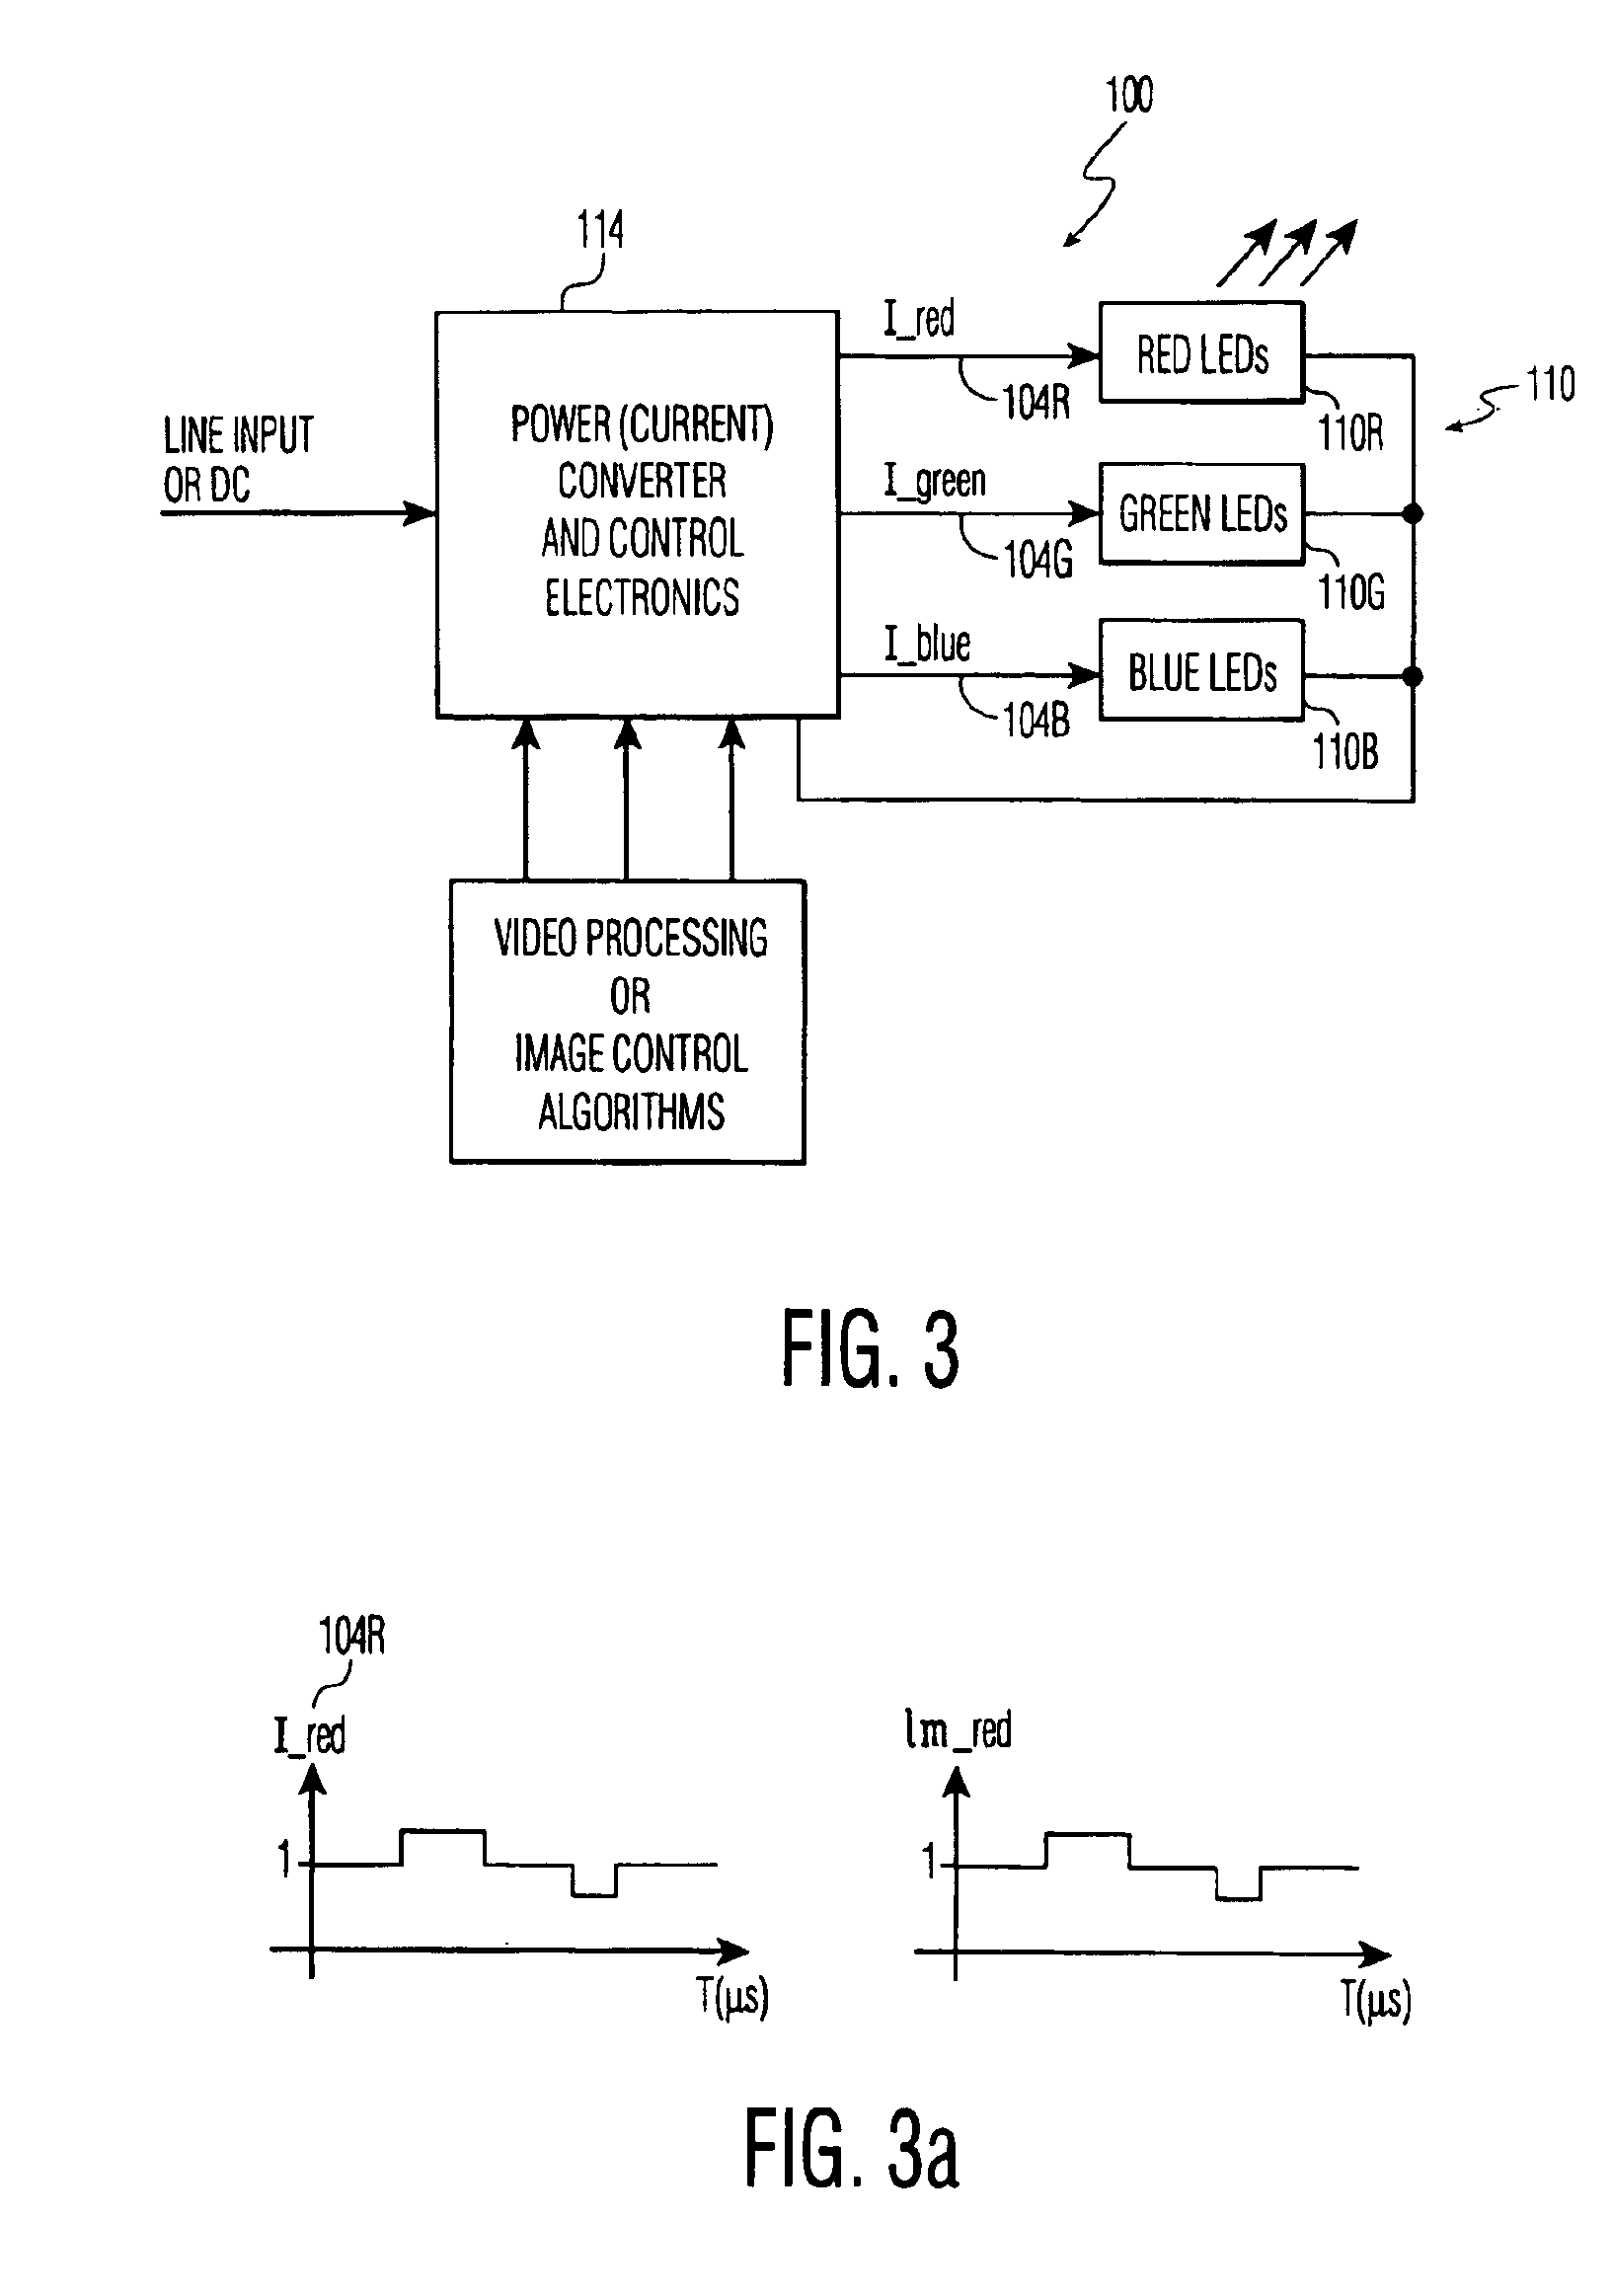 Control and drive circuit arrangement for illumination performance enhancement with LED light sources